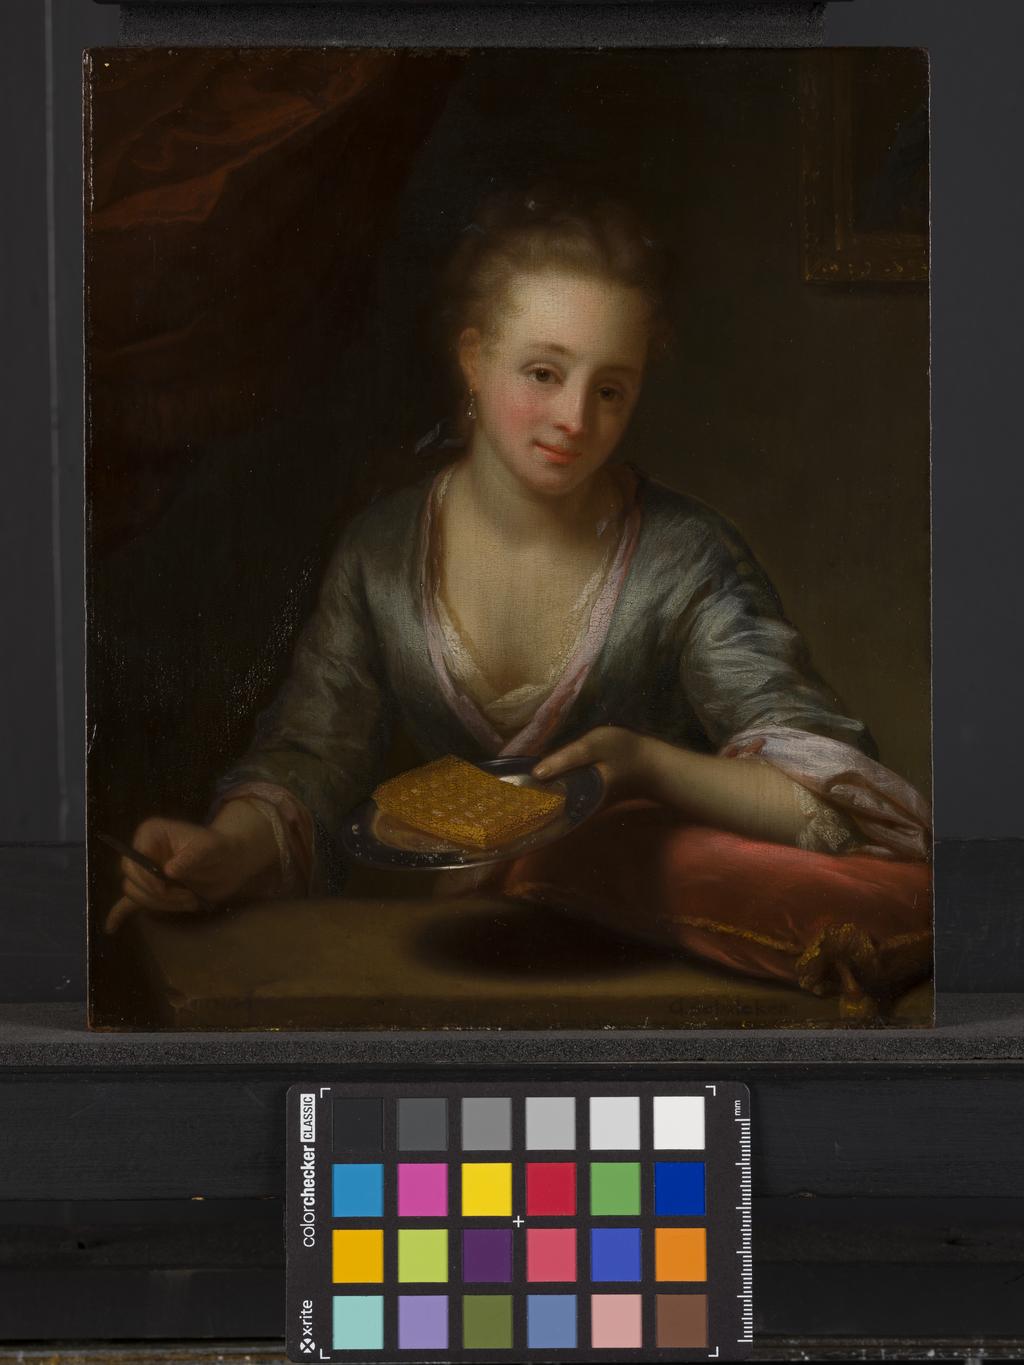 An image of A lady holding a plate. Schalcken, Godfried (Dutch, 1643-1706). Oil on panel, height 23.5 cm, width 20.5 cm, 1680-1690.